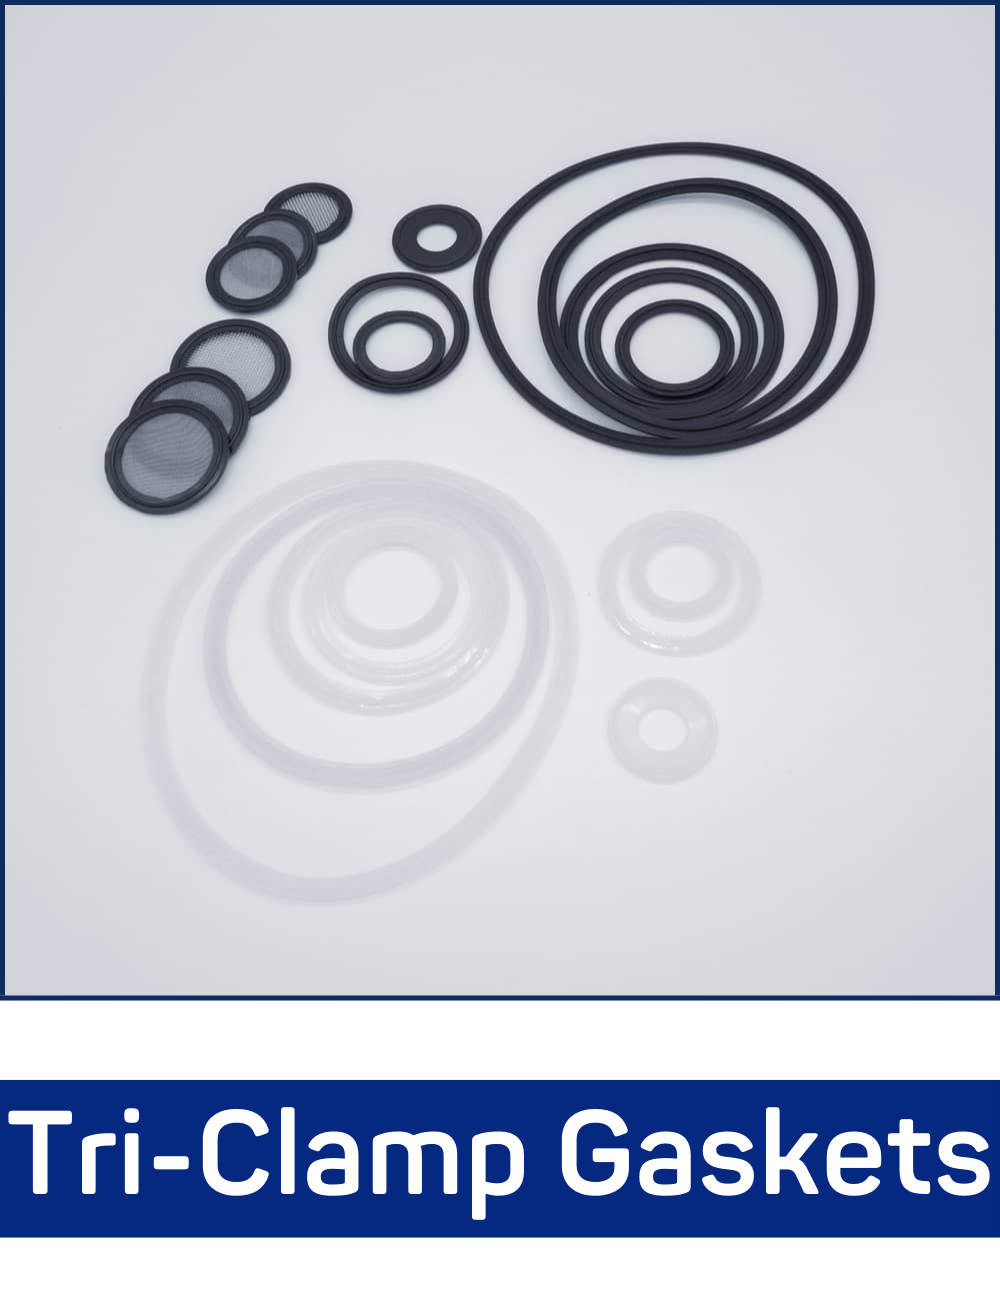 Tri clamp epdm and silicone gaskets